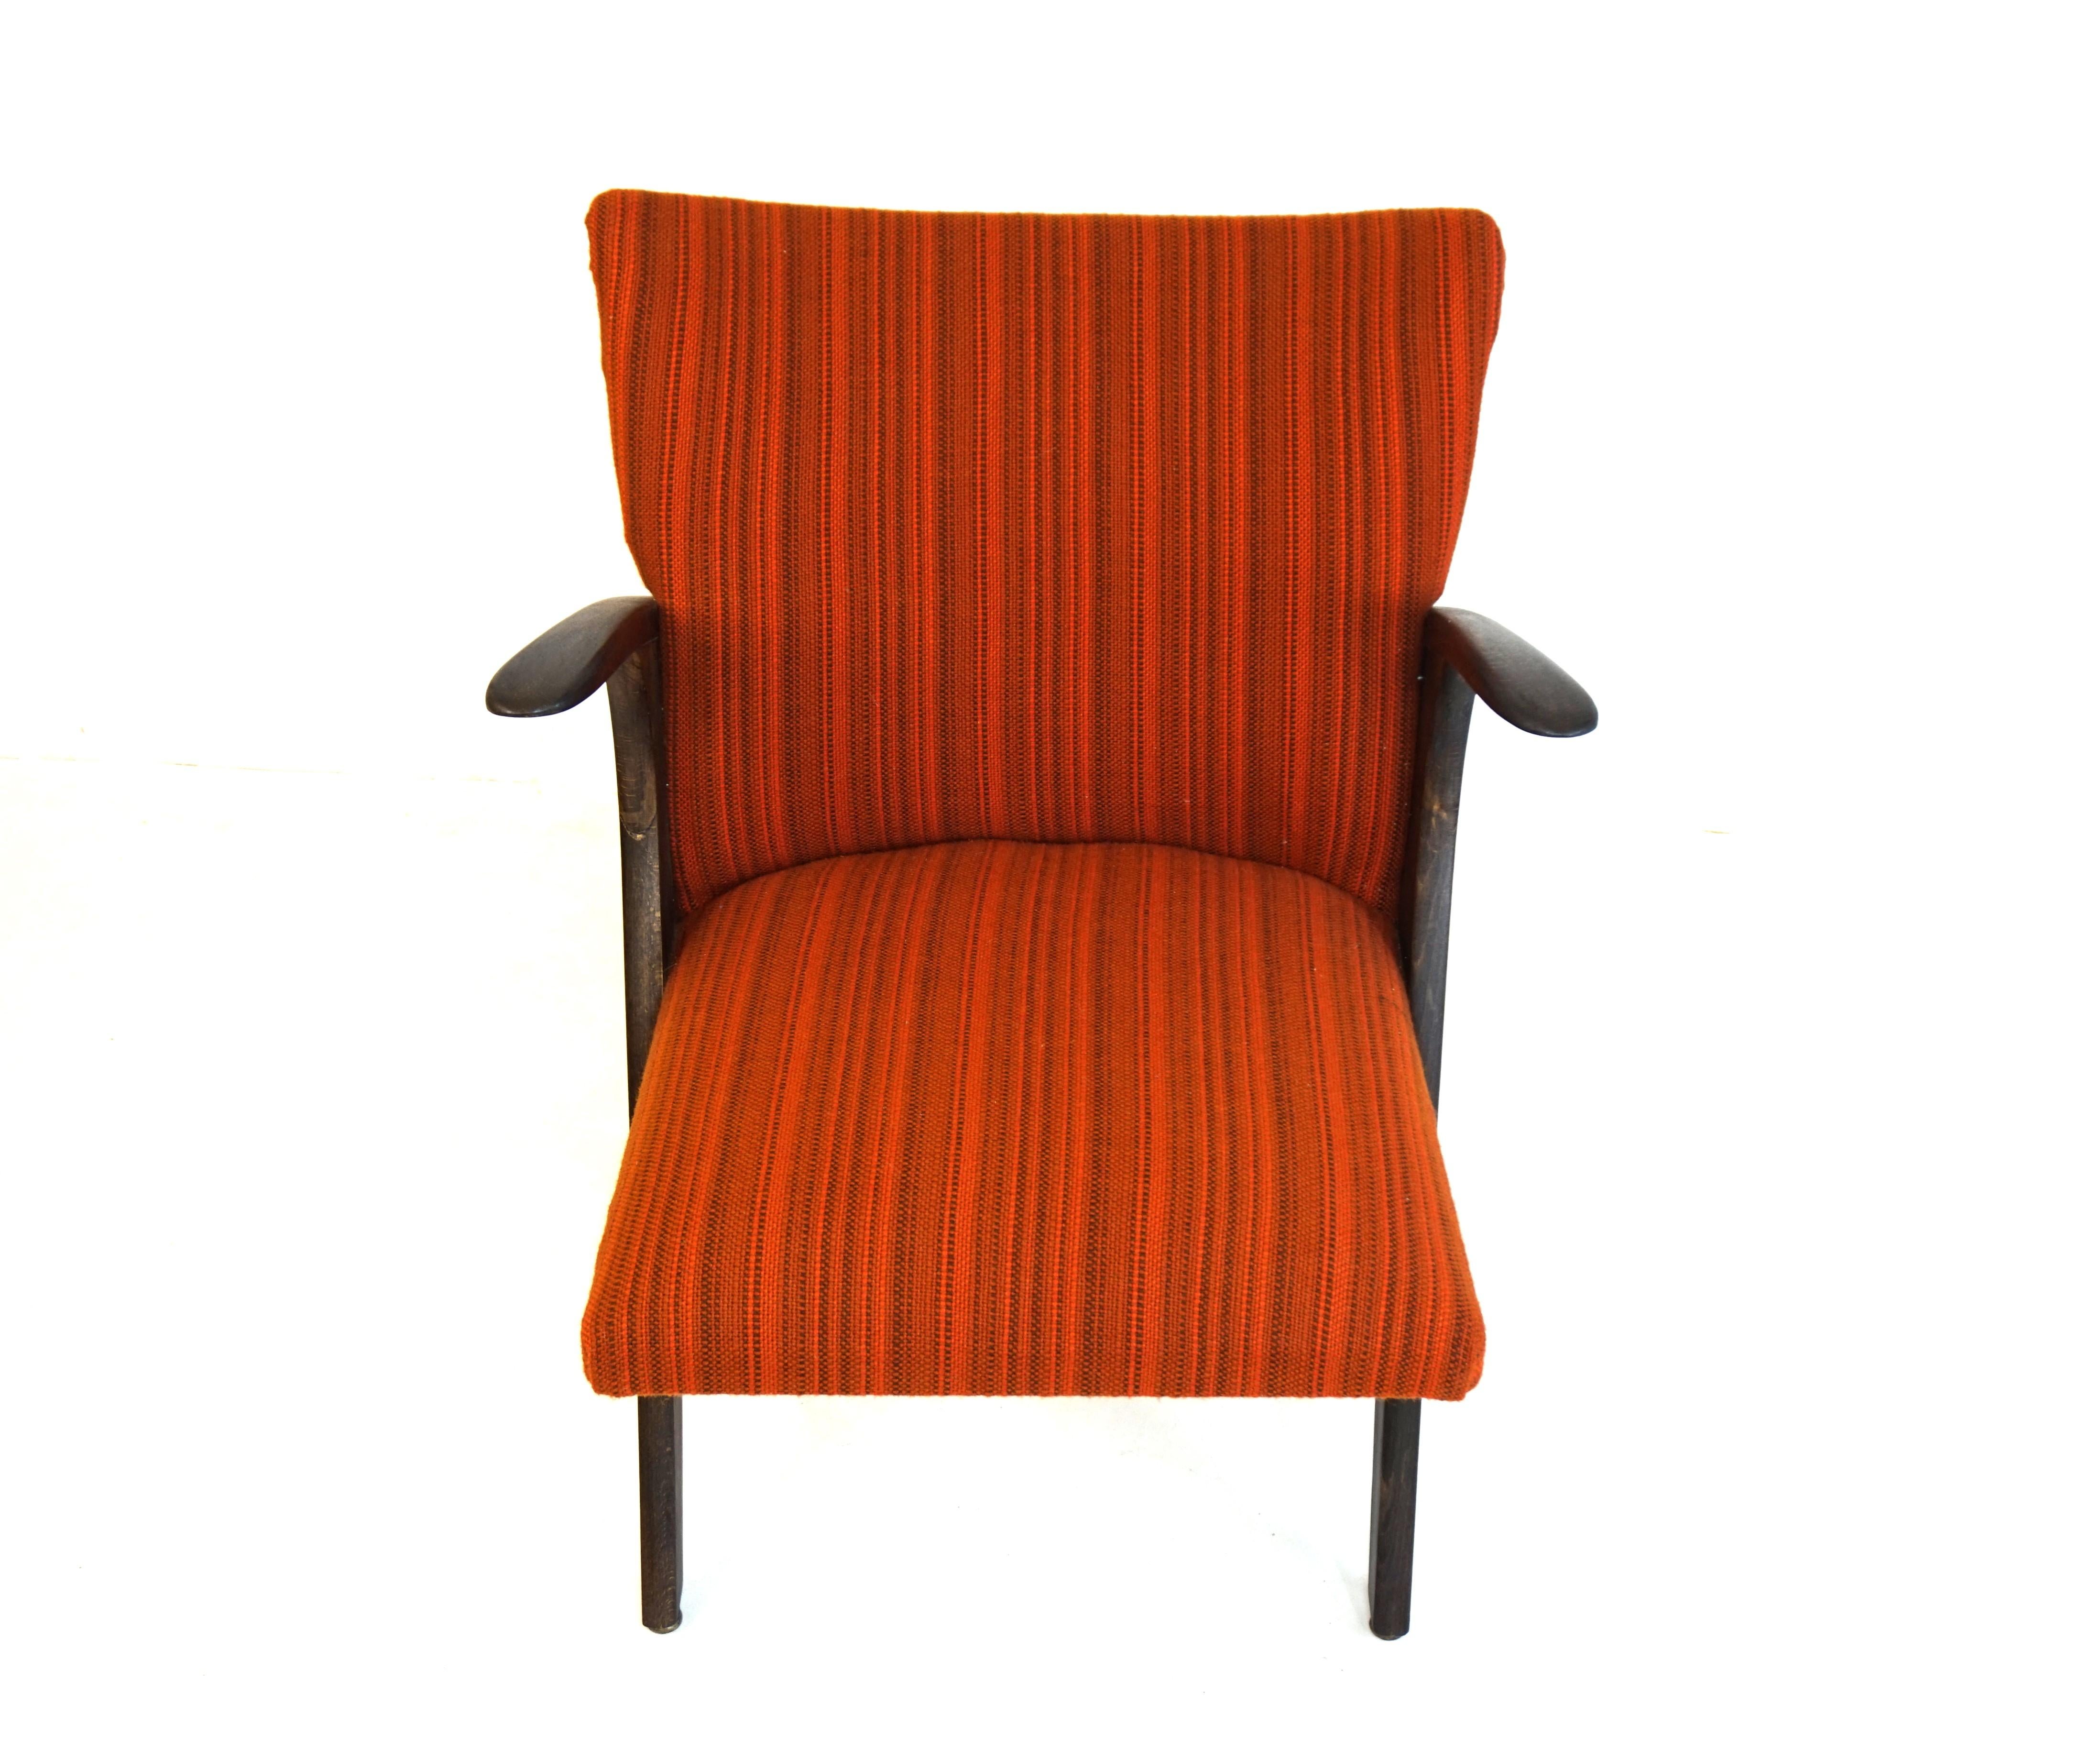 German Casala Penguin Chair by Carl Sasse For Sale